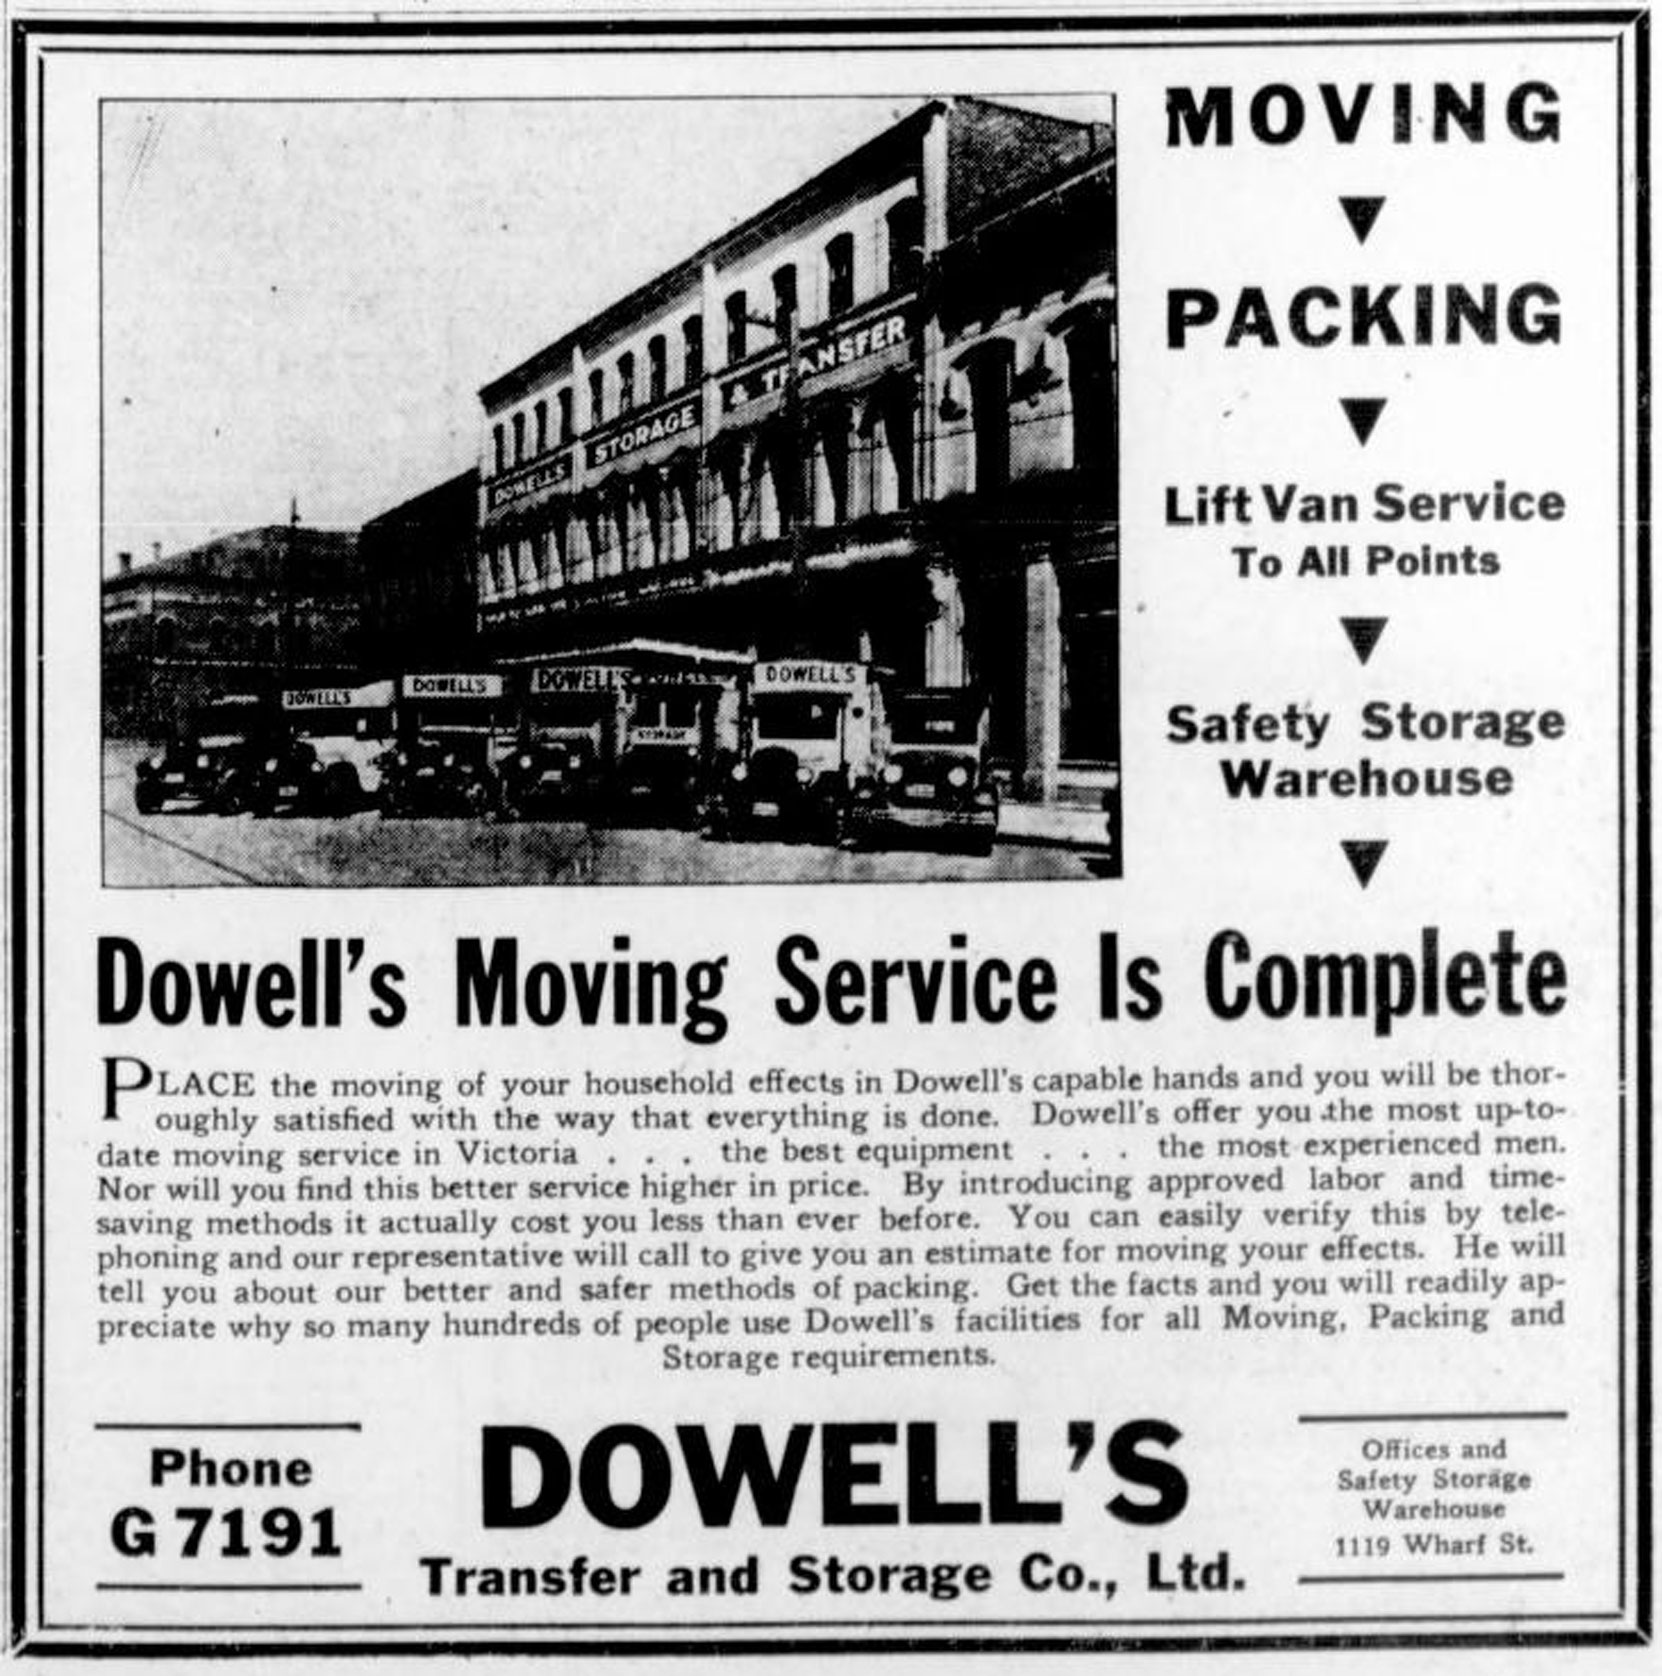 1933 advertisement for Dowell's Transfer & Storage Co., based in the Rithet Building, 1117-1125 Wharf Street (Victoria Online Sightseeing Tours collection)